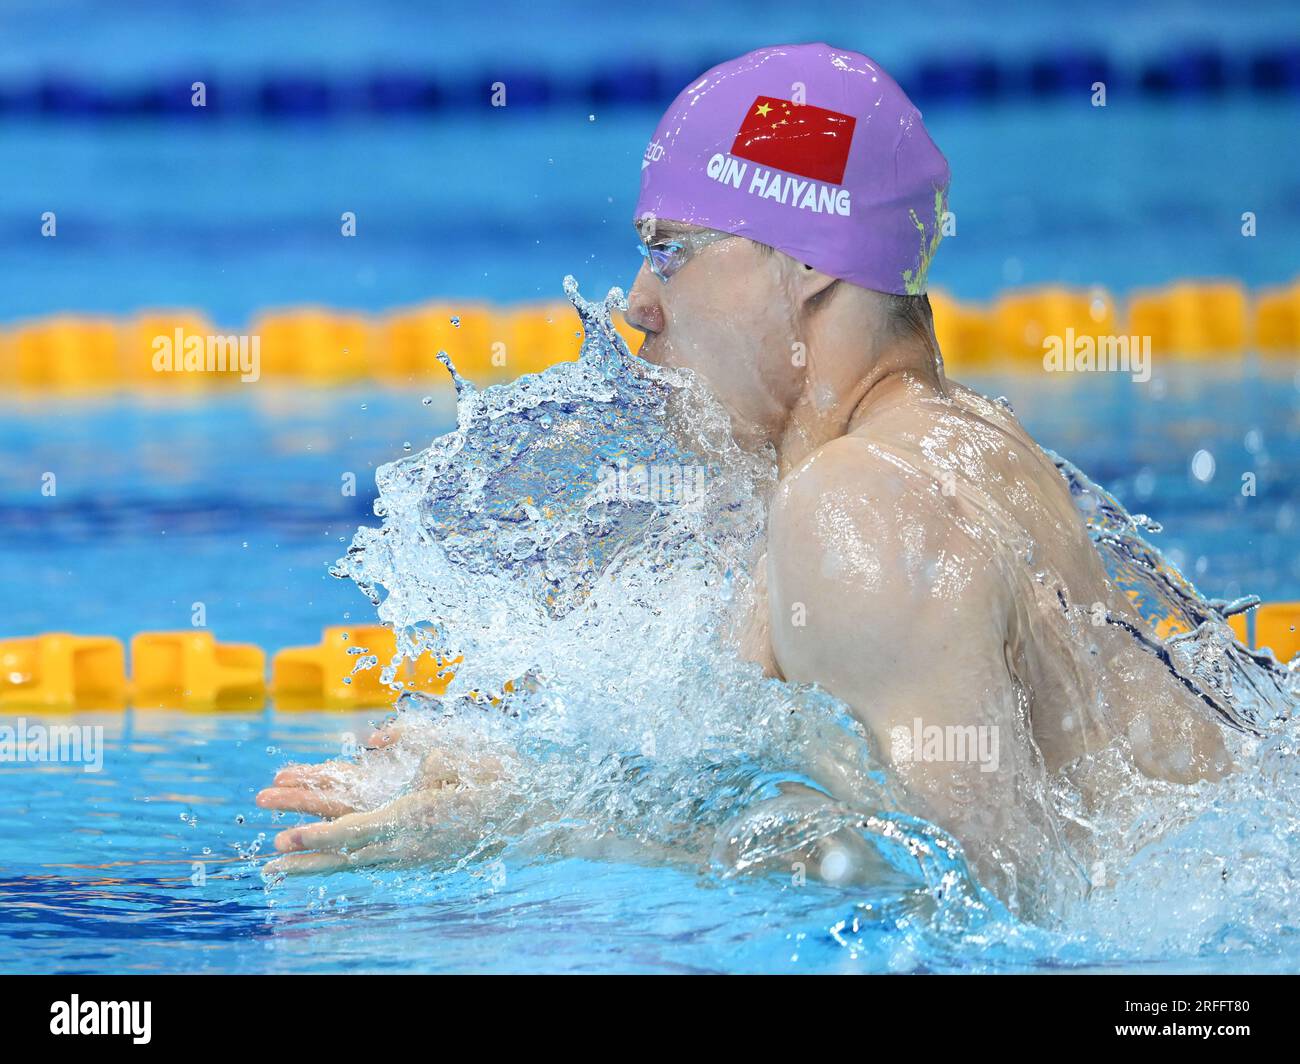 (230803) -- CHENGDU, Aug. 3, 2023 (Xinhua) - Qin Haiyang of China competes during the Men's 200m Breaststroke Semifinal of swimming at the 31st FISU Summer World University Games in Chengdu, southwest China's Sichuan Province, Aug. 3, 2023. (Xinhua/Zhang Long) Stock Photo